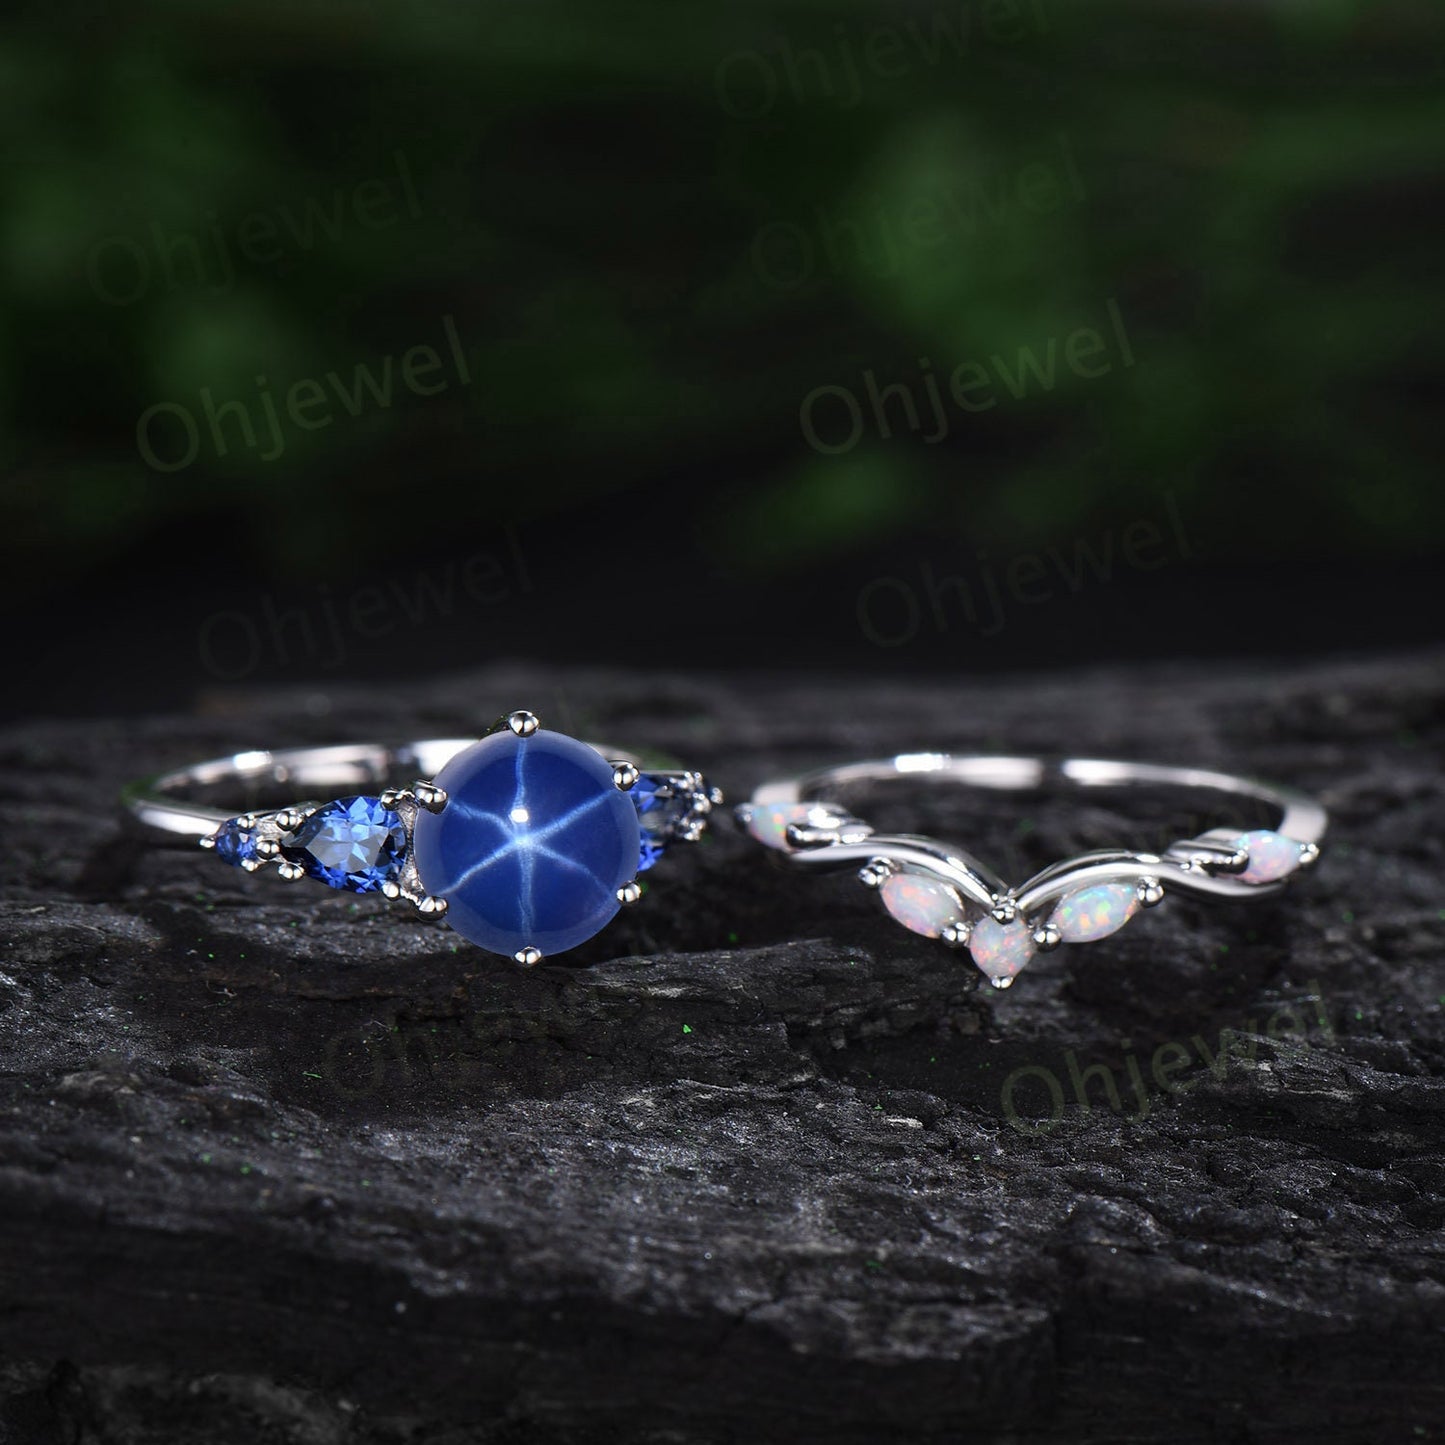 Round blue star sapphire ring vintage pear sapphire ring five stone blue gemstone ring opal wedding band engagement ring women bridal set